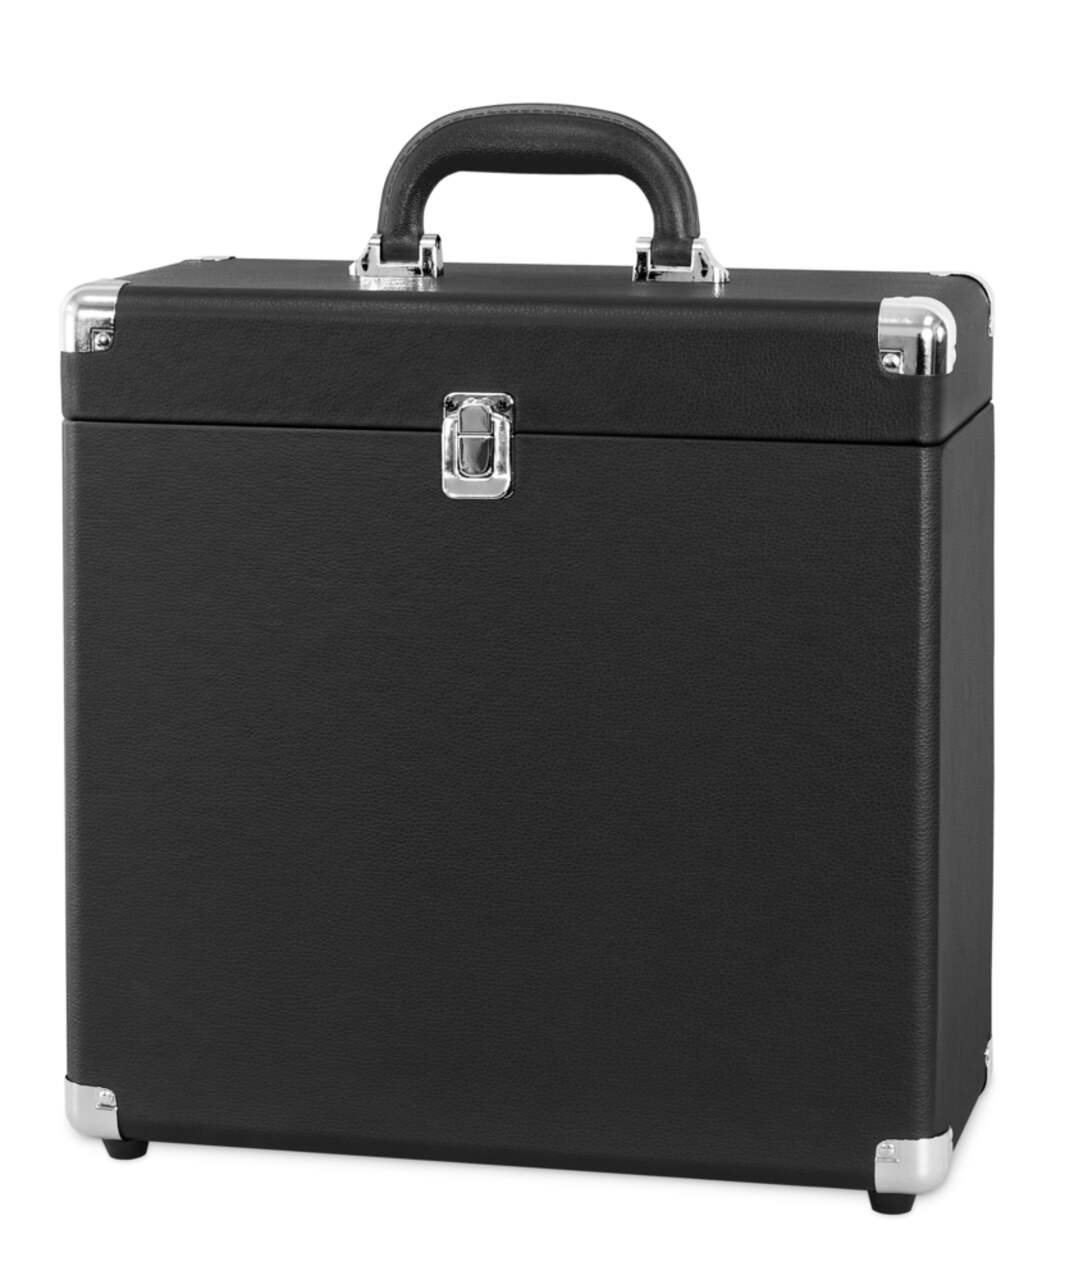 https://media-www.canadiantire.ca/product/living/electronics/home-entertainment-systems/0441297/vinyl-record-storage-case-deffd674-dc2d-4f74-abfc-bc09f9a77c4a.png?imdensity=1&imwidth=640&impolicy=mZoom